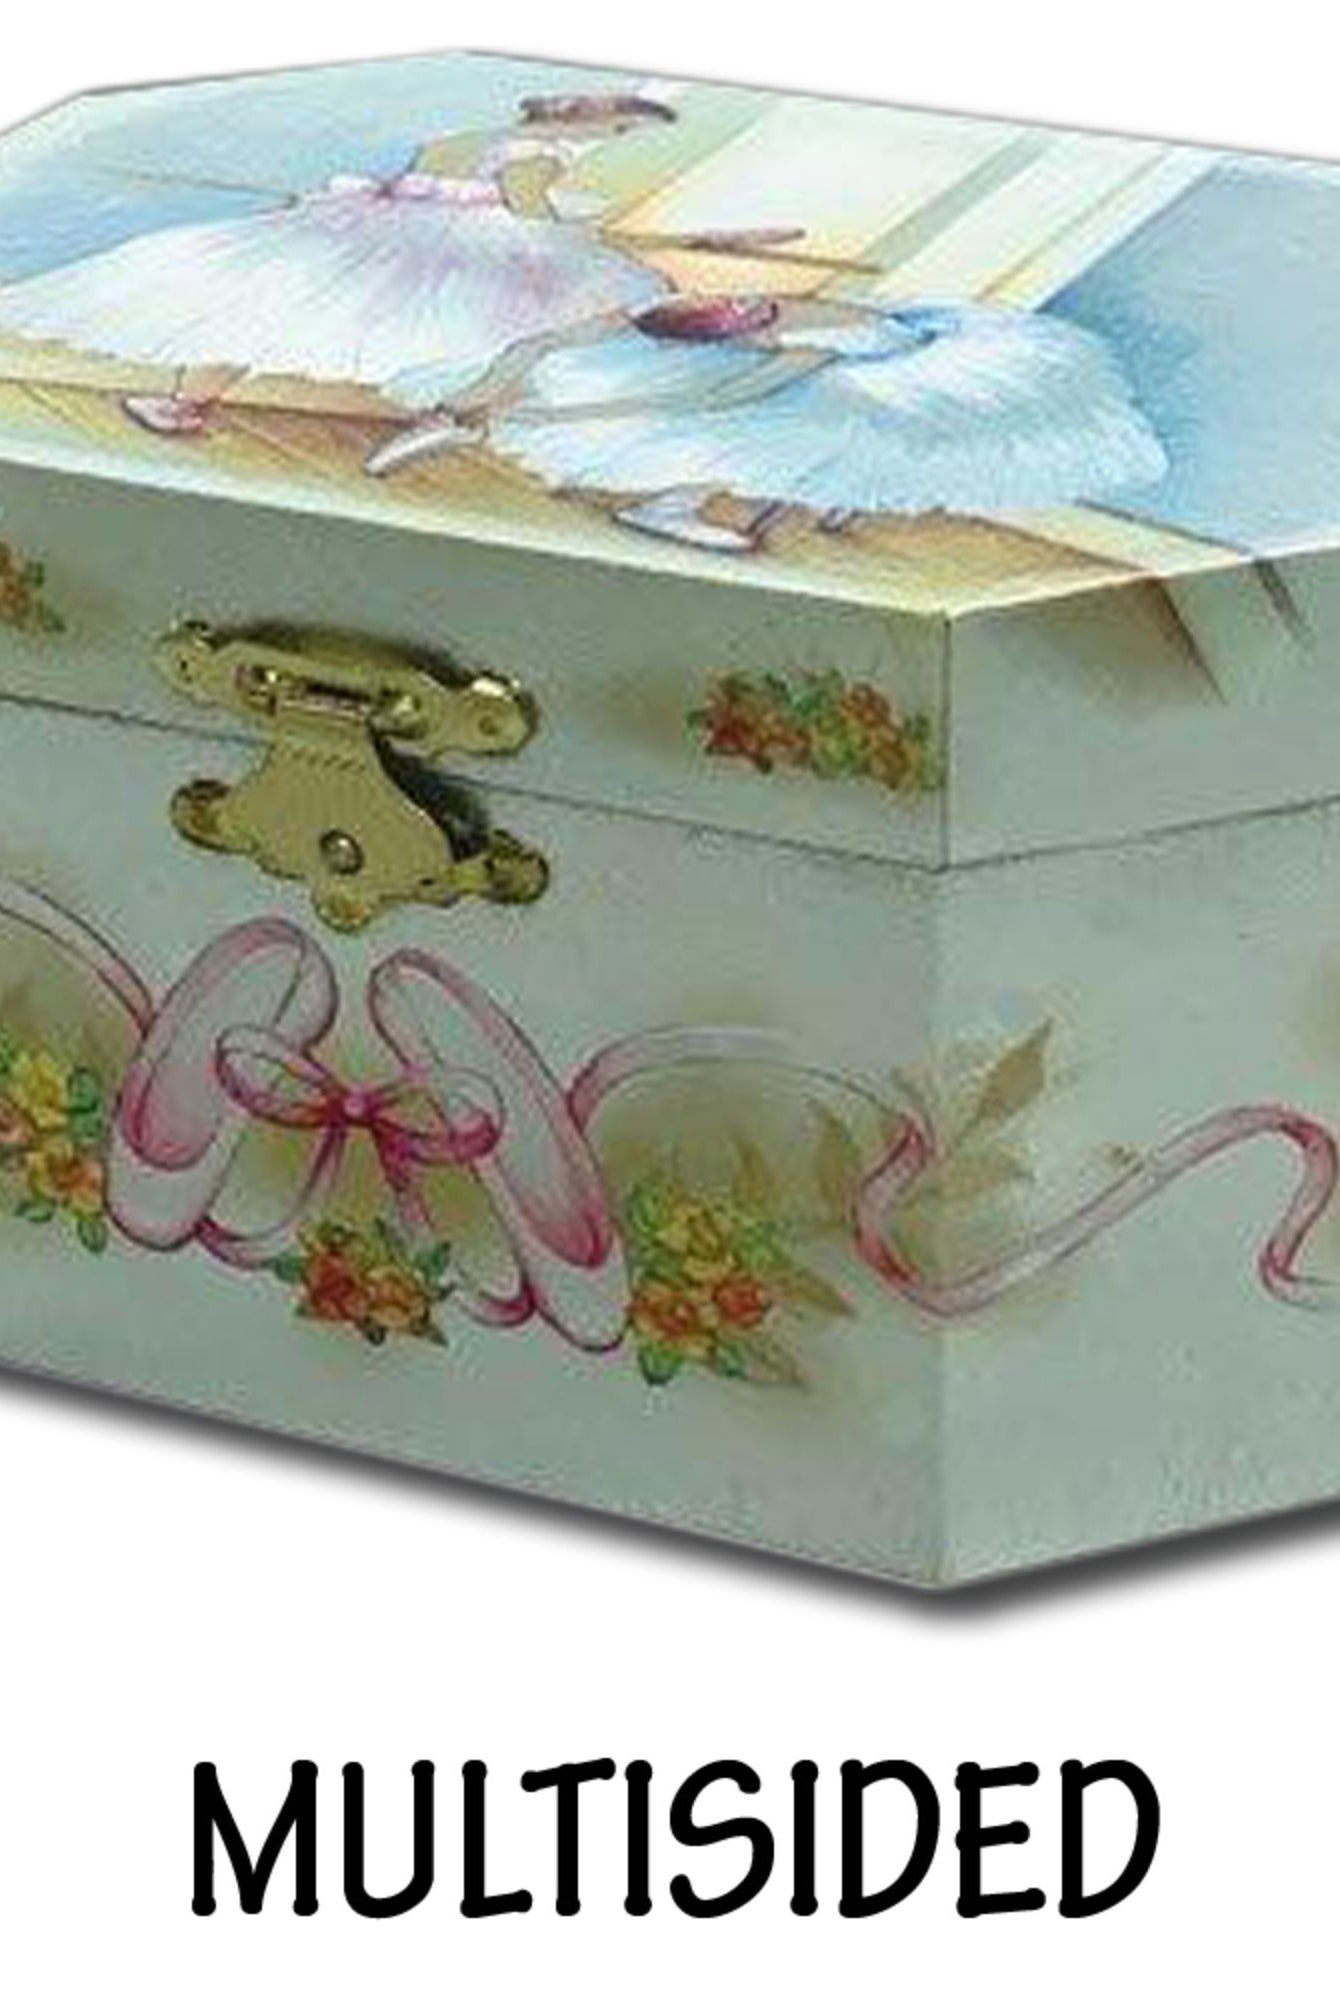 TYVM 15310 Musical Jewelry Box Multisided